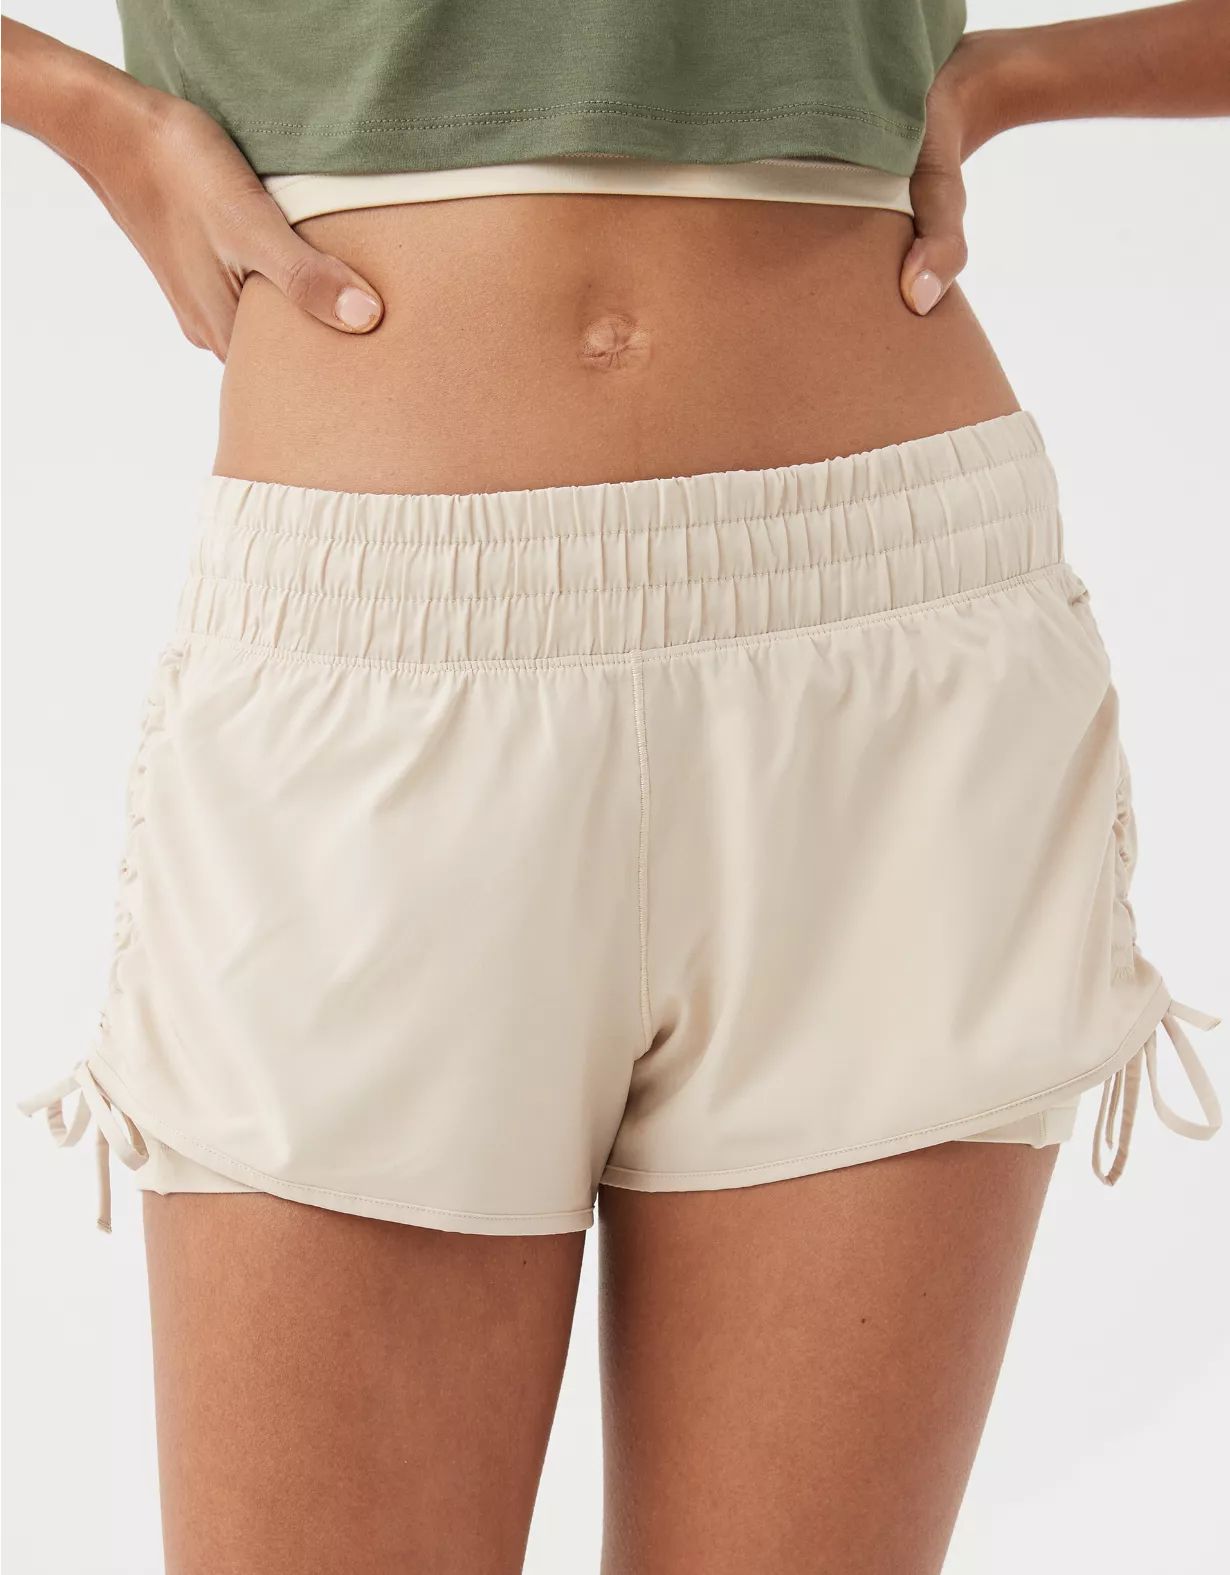 OFFLINE By Aerie Low Rise Ruched Hot Stuff Short | Aerie